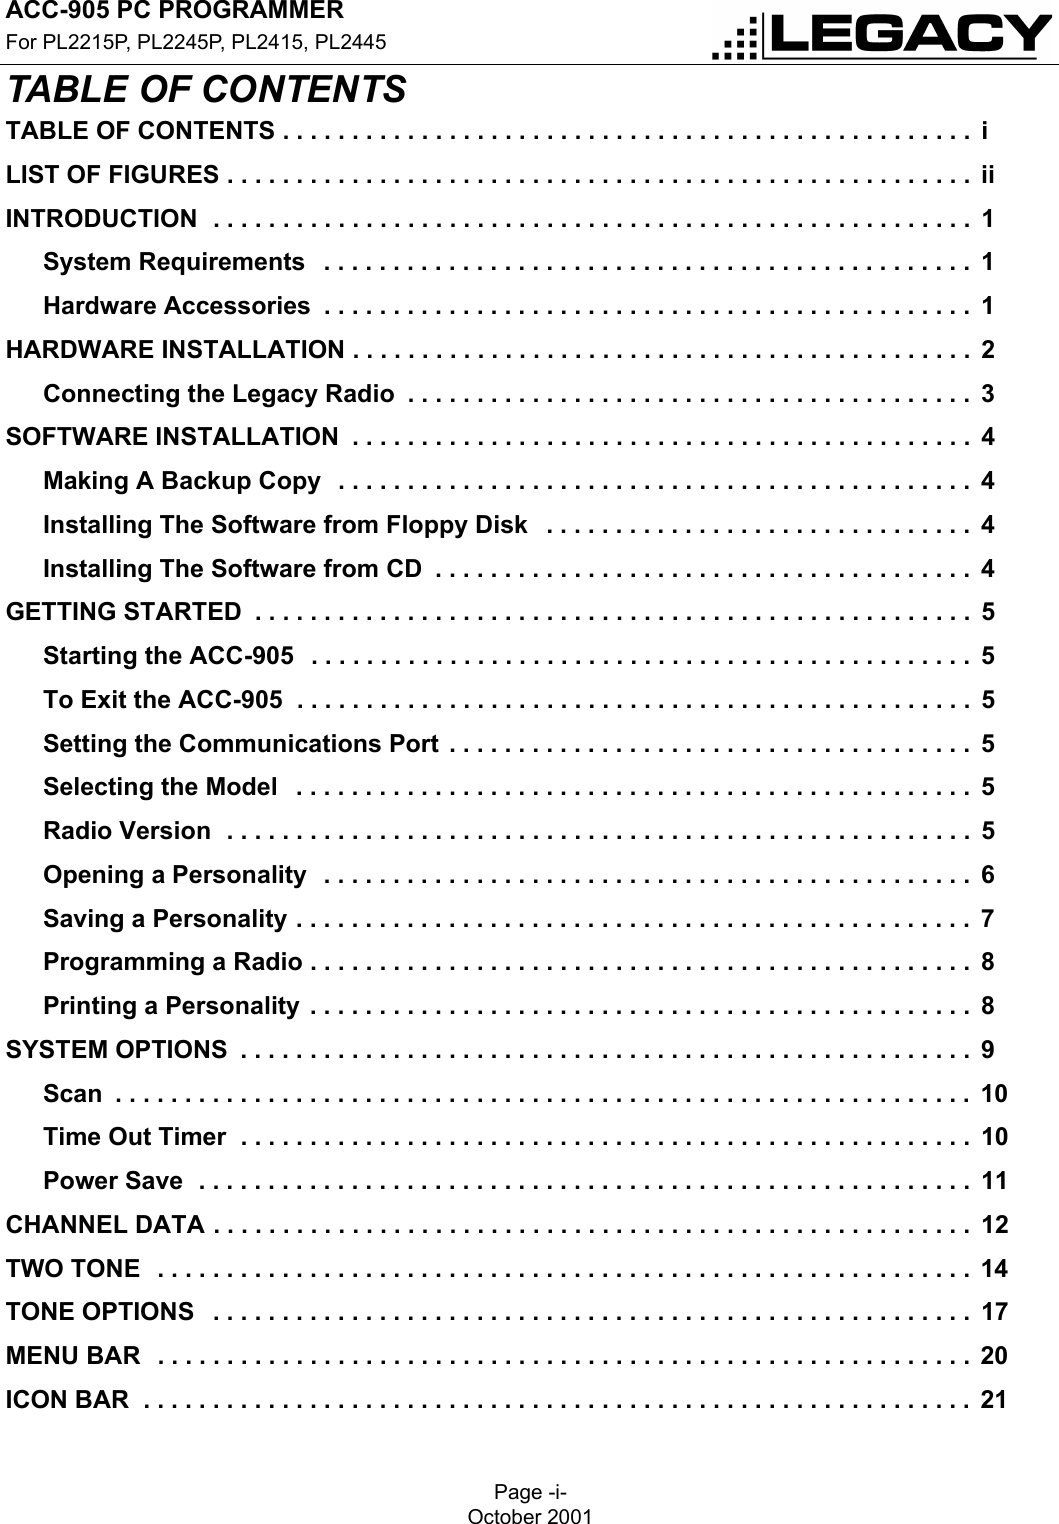 ACC-905 PC PROGRAMMERFor PL2215P, PL2245P, PL2415, PL2445Page -i-October 2001TABLE OF CONTENTSTABLE OF CONTENTSTABLE OF CONTENTS . . . . . . . . . . . . . . . . . . . . . . . . . . . . . . . . . . . . . . . . . . . . . . . . . .  iLIST OF FIGURES . . . . . . . . . . . . . . . . . . . . . . . . . . . . . . . . . . . . . . . . . . . . . . . . . . . . . .  iiINTRODUCTION  . . . . . . . . . . . . . . . . . . . . . . . . . . . . . . . . . . . . . . . . . . . . . . . . . . . . . . .  1System Requirements   . . . . . . . . . . . . . . . . . . . . . . . . . . . . . . . . . . . . . . . . . . . . . . .  1Hardware Accessories  . . . . . . . . . . . . . . . . . . . . . . . . . . . . . . . . . . . . . . . . . . . . . . .  1HARDWARE INSTALLATION . . . . . . . . . . . . . . . . . . . . . . . . . . . . . . . . . . . . . . . . . . . . .  2Connecting the Legacy Radio  . . . . . . . . . . . . . . . . . . . . . . . . . . . . . . . . . . . . . . . . .  3SOFTWARE INSTALLATION  . . . . . . . . . . . . . . . . . . . . . . . . . . . . . . . . . . . . . . . . . . . . .  4Making A Backup Copy  . . . . . . . . . . . . . . . . . . . . . . . . . . . . . . . . . . . . . . . . . . . . . .  4Installing The Software from Floppy Disk   . . . . . . . . . . . . . . . . . . . . . . . . . . . . . . .  4Installing The Software from CD  . . . . . . . . . . . . . . . . . . . . . . . . . . . . . . . . . . . . . . .  4GETTING STARTED  . . . . . . . . . . . . . . . . . . . . . . . . . . . . . . . . . . . . . . . . . . . . . . . . . . . .  5Starting the ACC-905  . . . . . . . . . . . . . . . . . . . . . . . . . . . . . . . . . . . . . . . . . . . . . . . .  5To Exit the ACC-905  . . . . . . . . . . . . . . . . . . . . . . . . . . . . . . . . . . . . . . . . . . . . . . . . .  5Setting the Communications Port . . . . . . . . . . . . . . . . . . . . . . . . . . . . . . . . . . . . . .  5Selecting the Model   . . . . . . . . . . . . . . . . . . . . . . . . . . . . . . . . . . . . . . . . . . . . . . . . .  5Radio Version  . . . . . . . . . . . . . . . . . . . . . . . . . . . . . . . . . . . . . . . . . . . . . . . . . . . . . .  5Opening a Personality  . . . . . . . . . . . . . . . . . . . . . . . . . . . . . . . . . . . . . . . . . . . . . . .  6Saving a Personality . . . . . . . . . . . . . . . . . . . . . . . . . . . . . . . . . . . . . . . . . . . . . . . . .  7Programming a Radio . . . . . . . . . . . . . . . . . . . . . . . . . . . . . . . . . . . . . . . . . . . . . . . .  8Printing a Personality . . . . . . . . . . . . . . . . . . . . . . . . . . . . . . . . . . . . . . . . . . . . . . . .  8SYSTEM OPTIONS  . . . . . . . . . . . . . . . . . . . . . . . . . . . . . . . . . . . . . . . . . . . . . . . . . . . . .  9Scan  . . . . . . . . . . . . . . . . . . . . . . . . . . . . . . . . . . . . . . . . . . . . . . . . . . . . . . . . . . . . . . 10Time Out Timer  . . . . . . . . . . . . . . . . . . . . . . . . . . . . . . . . . . . . . . . . . . . . . . . . . . . . .  10Power Save  . . . . . . . . . . . . . . . . . . . . . . . . . . . . . . . . . . . . . . . . . . . . . . . . . . . . . . . .  11CHANNEL DATA . . . . . . . . . . . . . . . . . . . . . . . . . . . . . . . . . . . . . . . . . . . . . . . . . . . . . . .  12TWO TONE  . . . . . . . . . . . . . . . . . . . . . . . . . . . . . . . . . . . . . . . . . . . . . . . . . . . . . . . . . . . 14TONE OPTIONS   . . . . . . . . . . . . . . . . . . . . . . . . . . . . . . . . . . . . . . . . . . . . . . . . . . . . . . .  17MENU BAR   . . . . . . . . . . . . . . . . . . . . . . . . . . . . . . . . . . . . . . . . . . . . . . . . . . . . . . . . . . . 20ICON BAR  . . . . . . . . . . . . . . . . . . . . . . . . . . . . . . . . . . . . . . . . . . . . . . . . . . . . . . . . . . . .  21